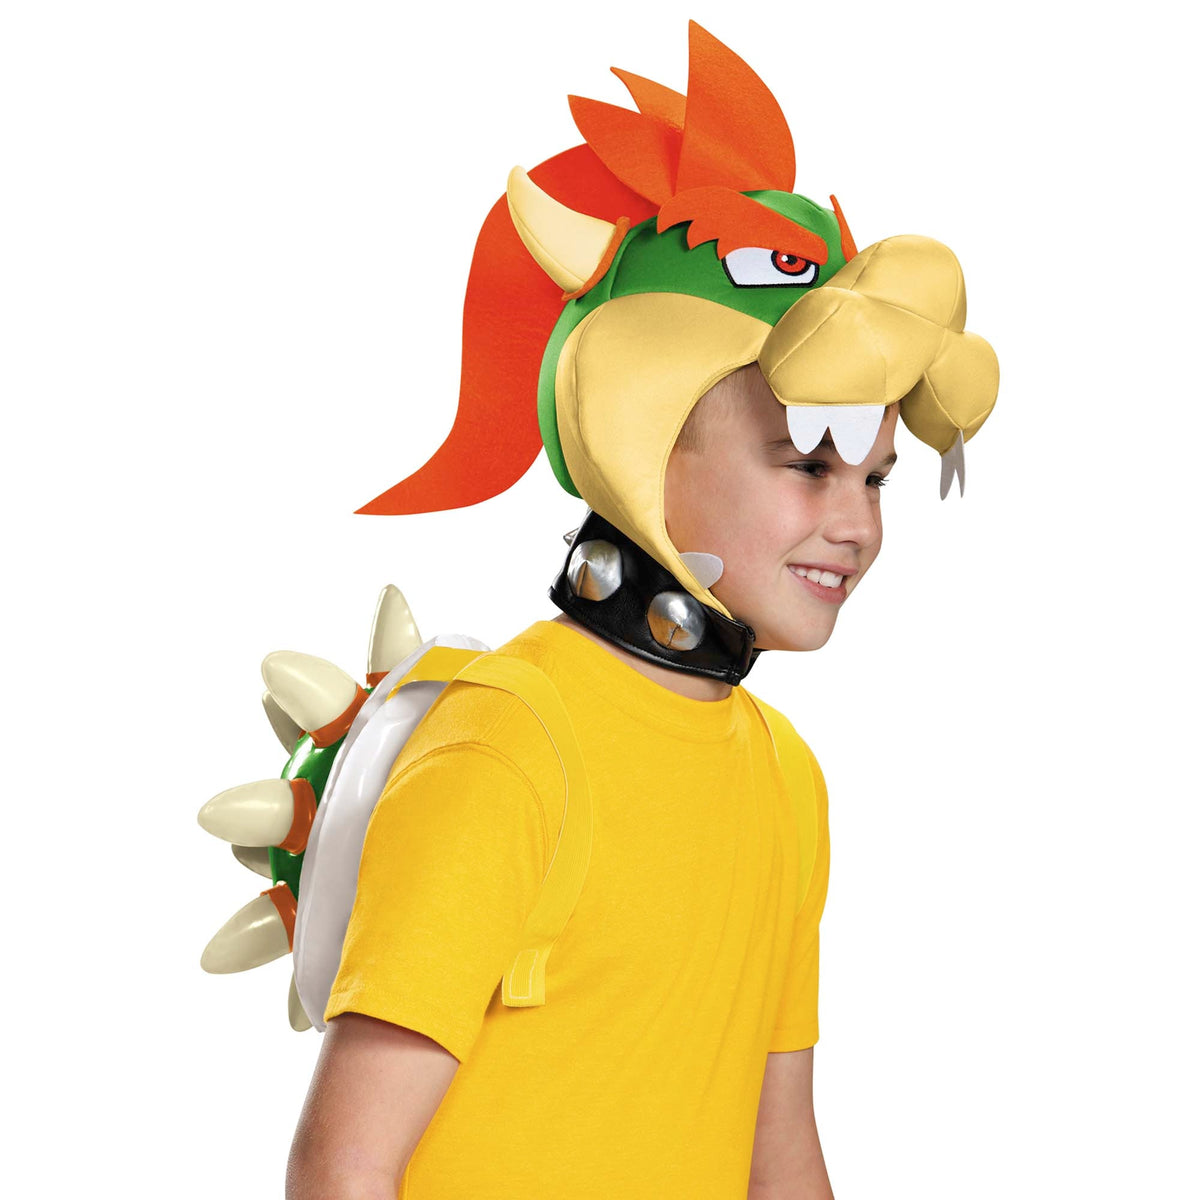 DISGUISE (TOY-SPORT) Costume Accessories Super Mario Bros Bowser Accessory Kit for Kids, Nintendo